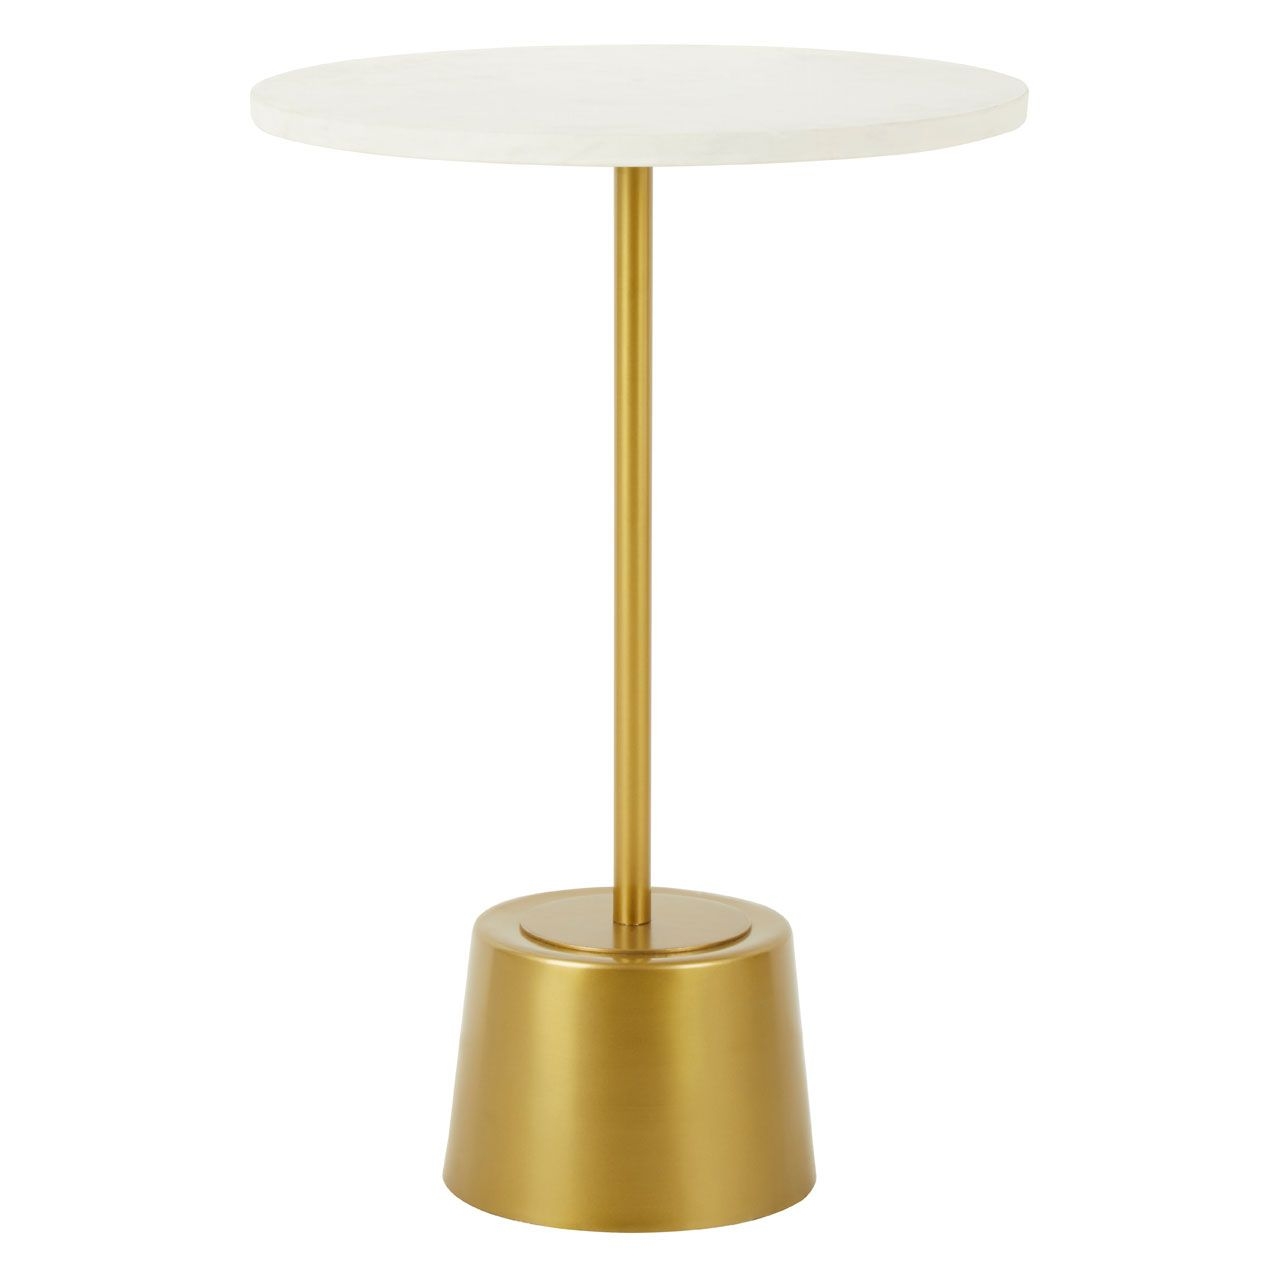 Rabia White Marble Top Side Table With Brass Base